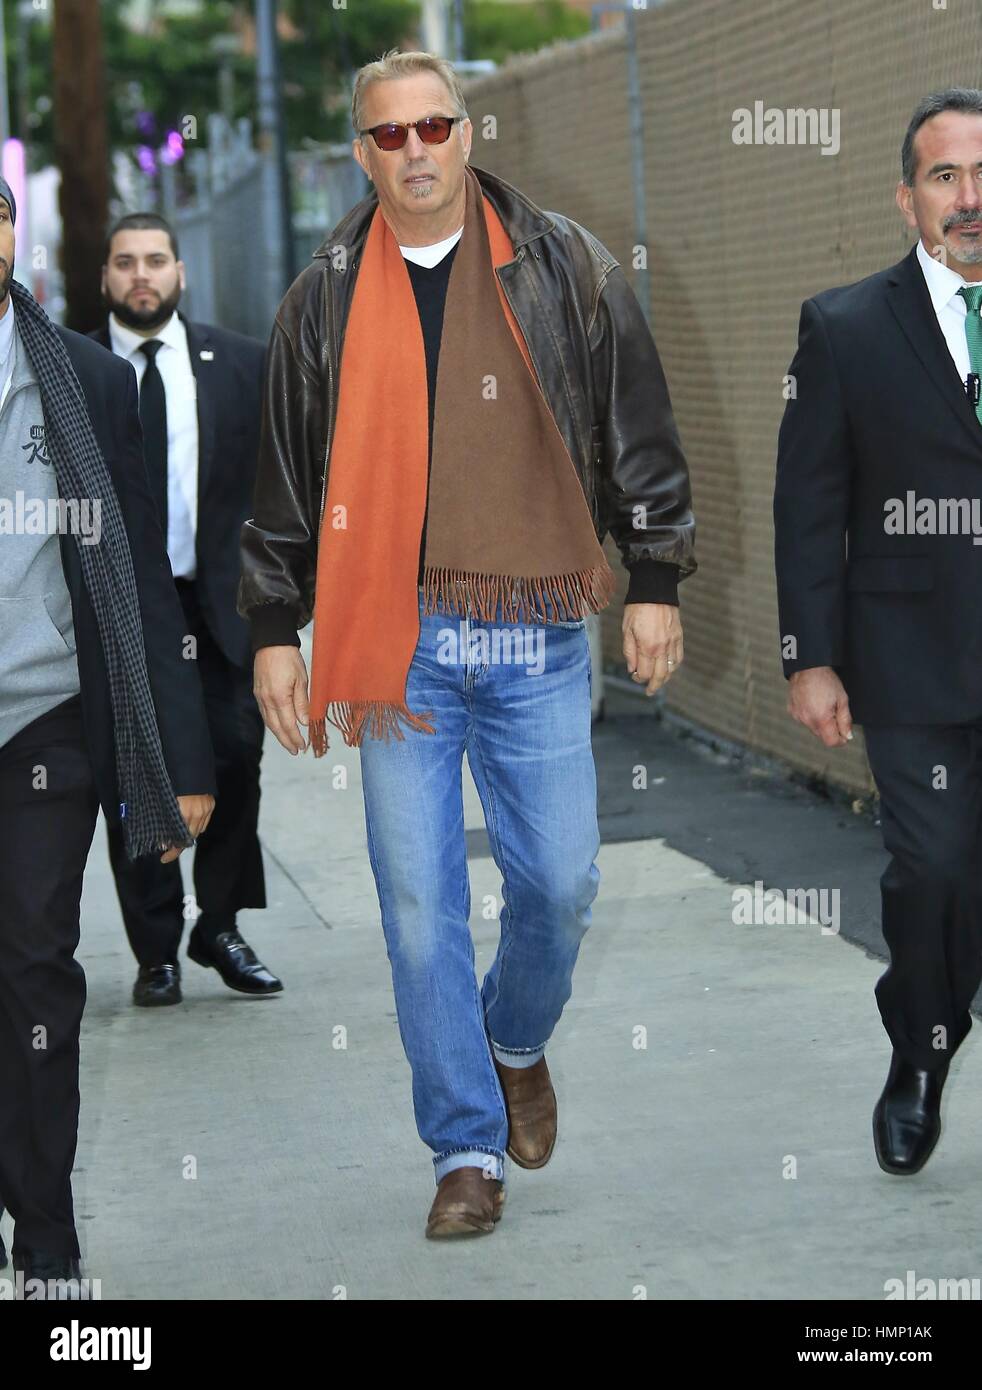 Kevin Costner arrives at the Jimmy Kimmel studios ahead of an appearance on the show  Featuring: Kevin Costner Where: Los Angeles, California, United States When: 04 Jan 2017 Credit: WENN.com Stock Photo